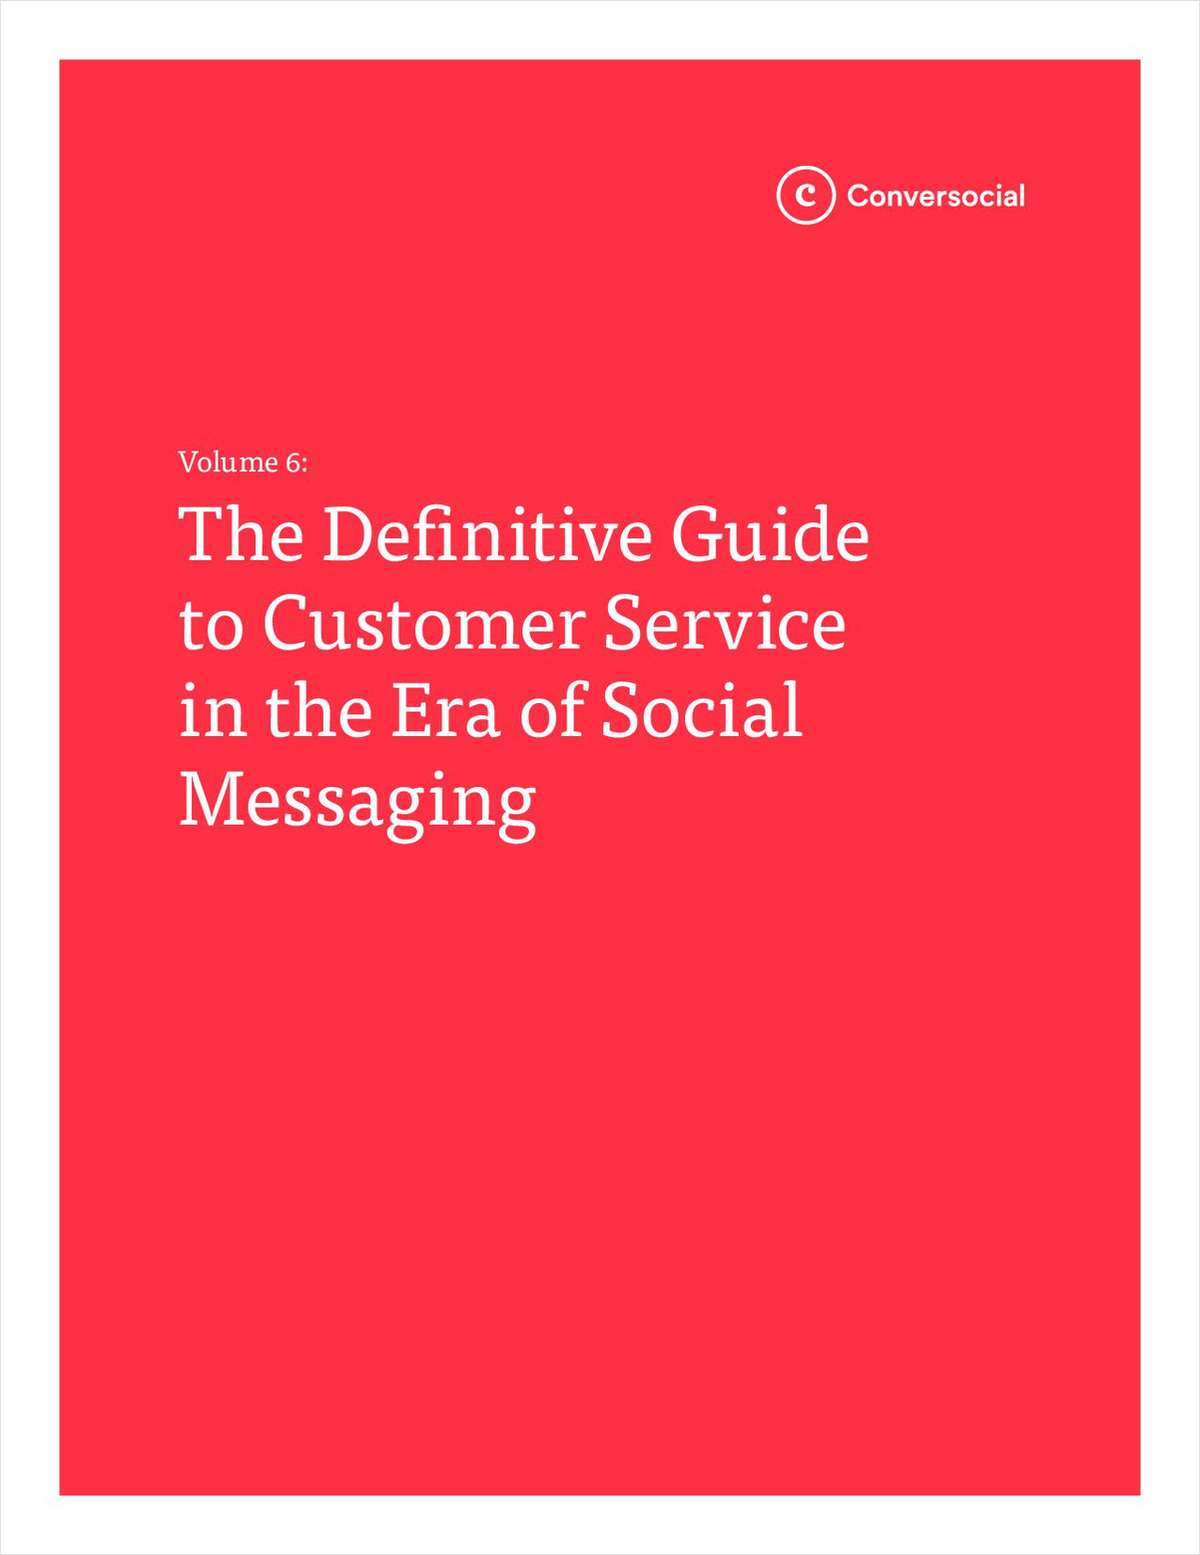 The Definitive Guide to Customer Service in the Era of Social Messaging